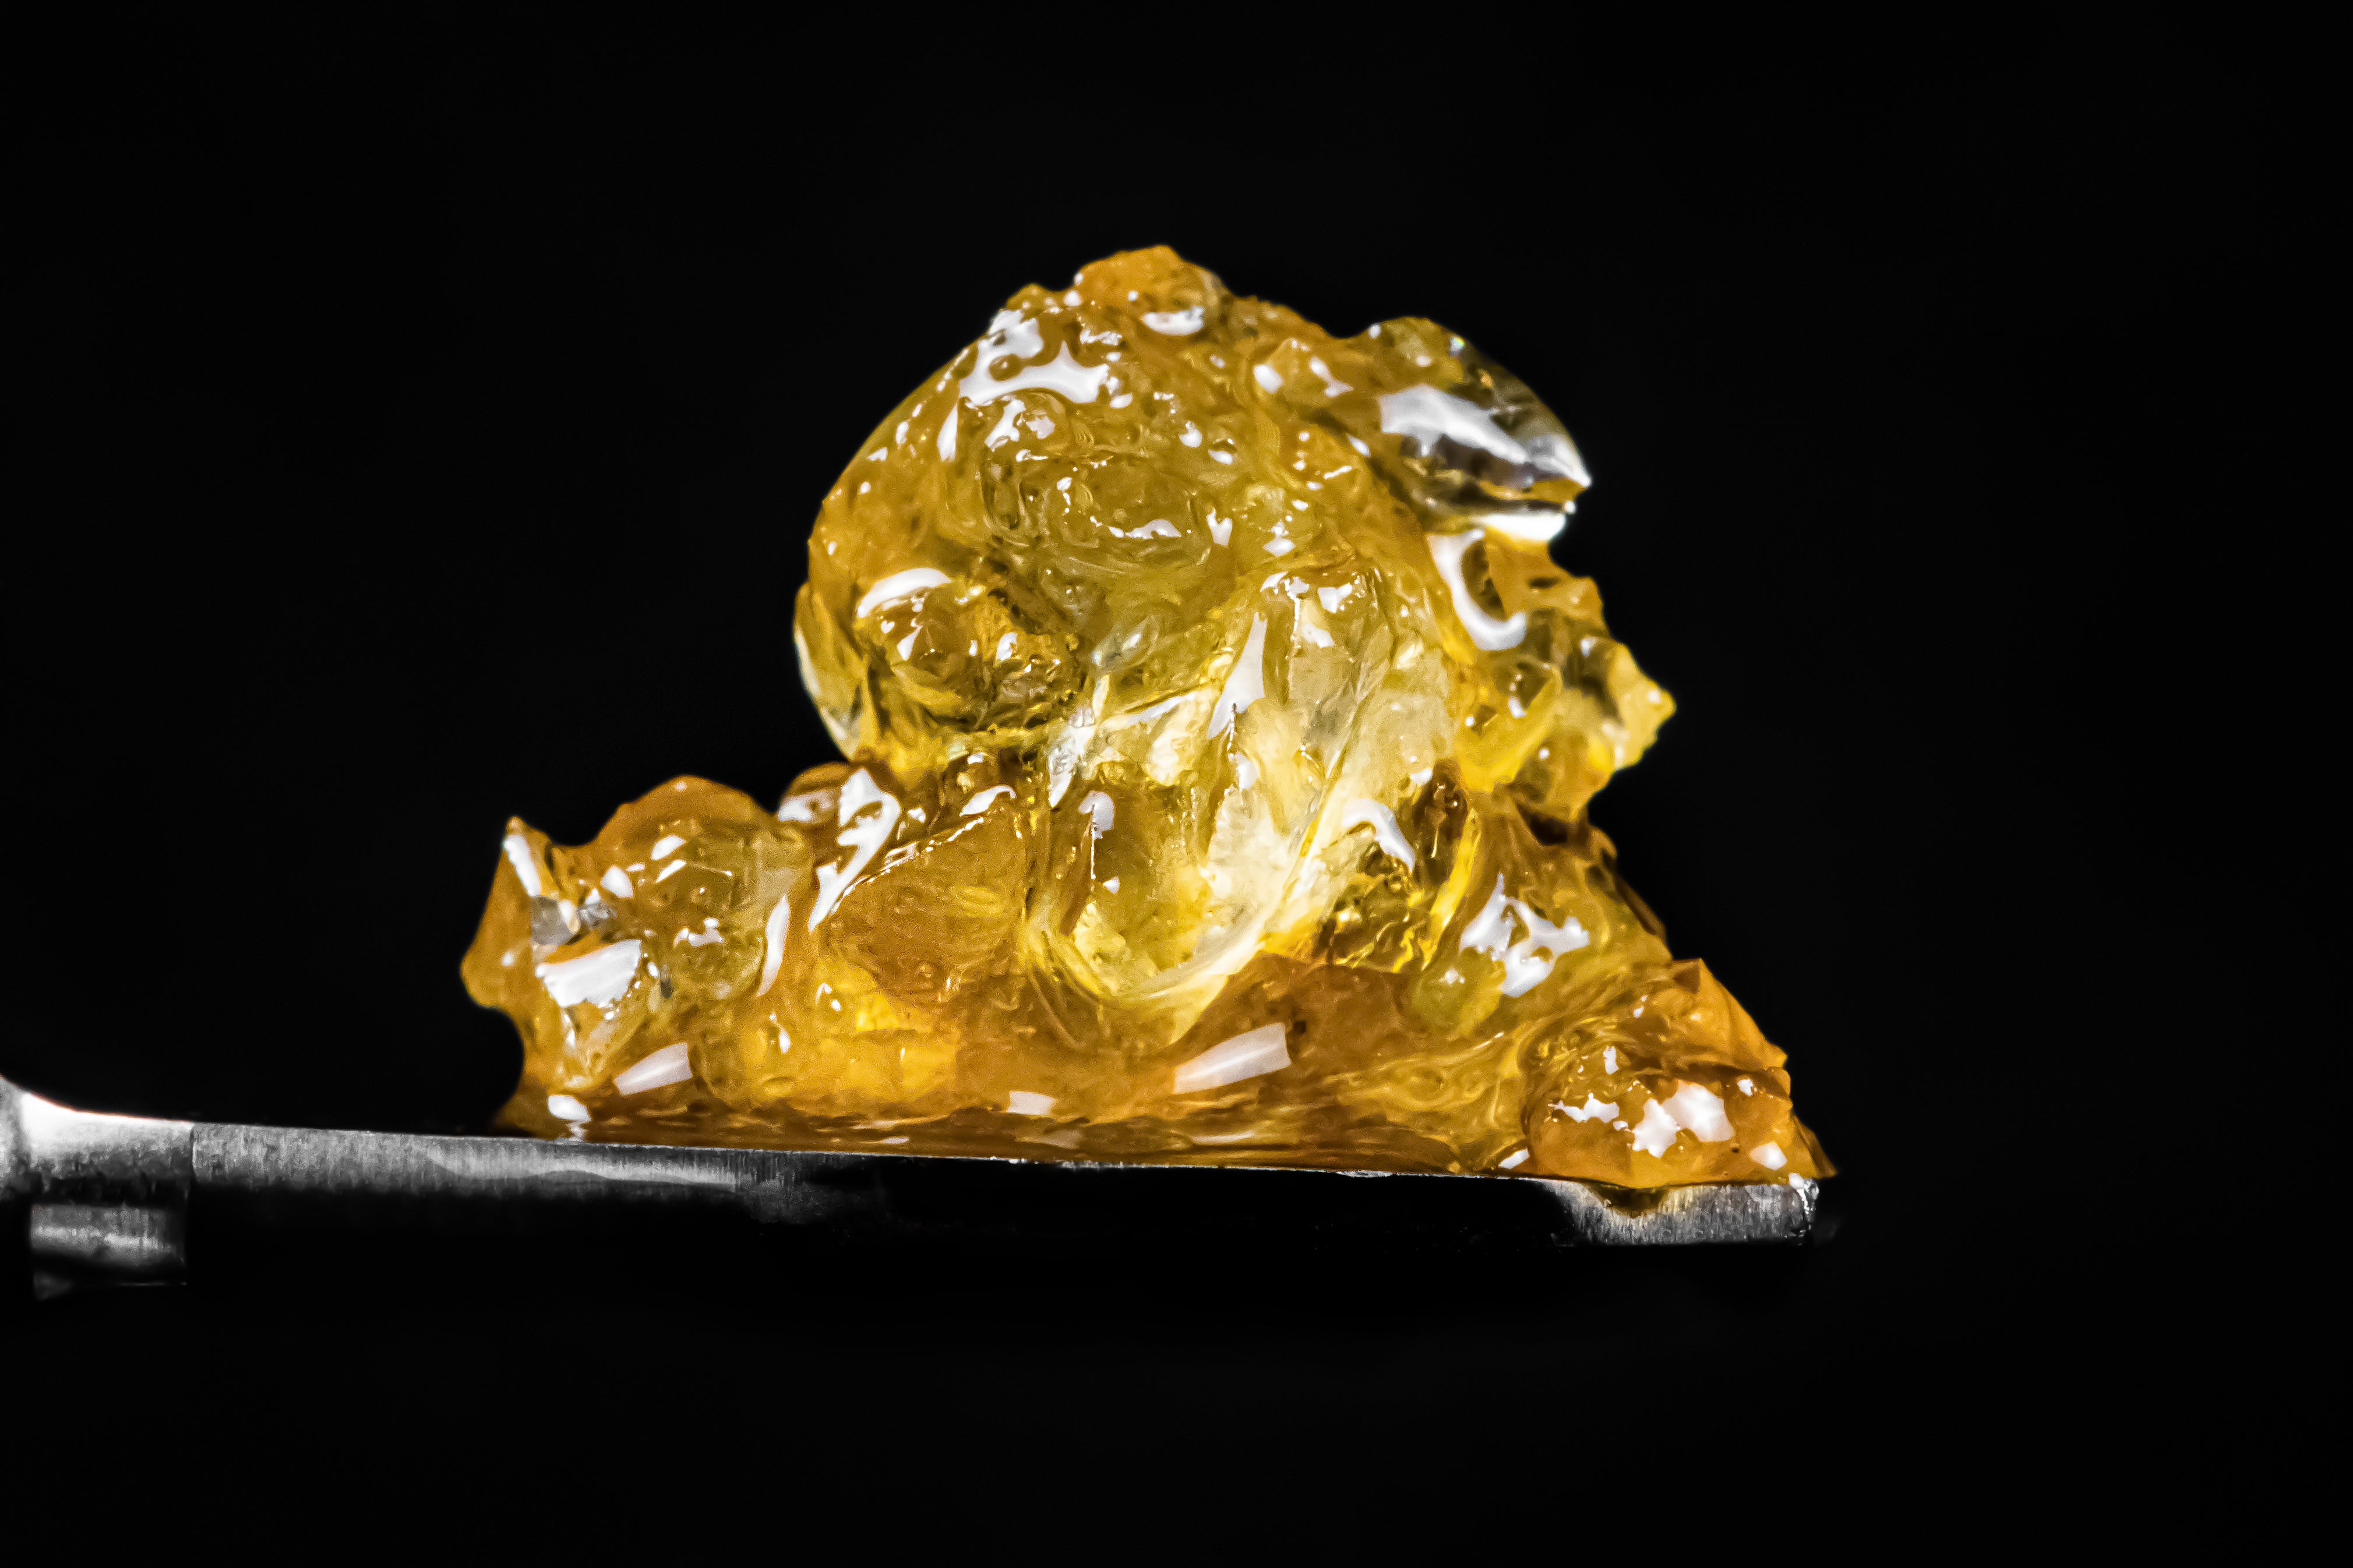 Live resin diamonds ready to be dabbed are served on a metal dabbing tool.